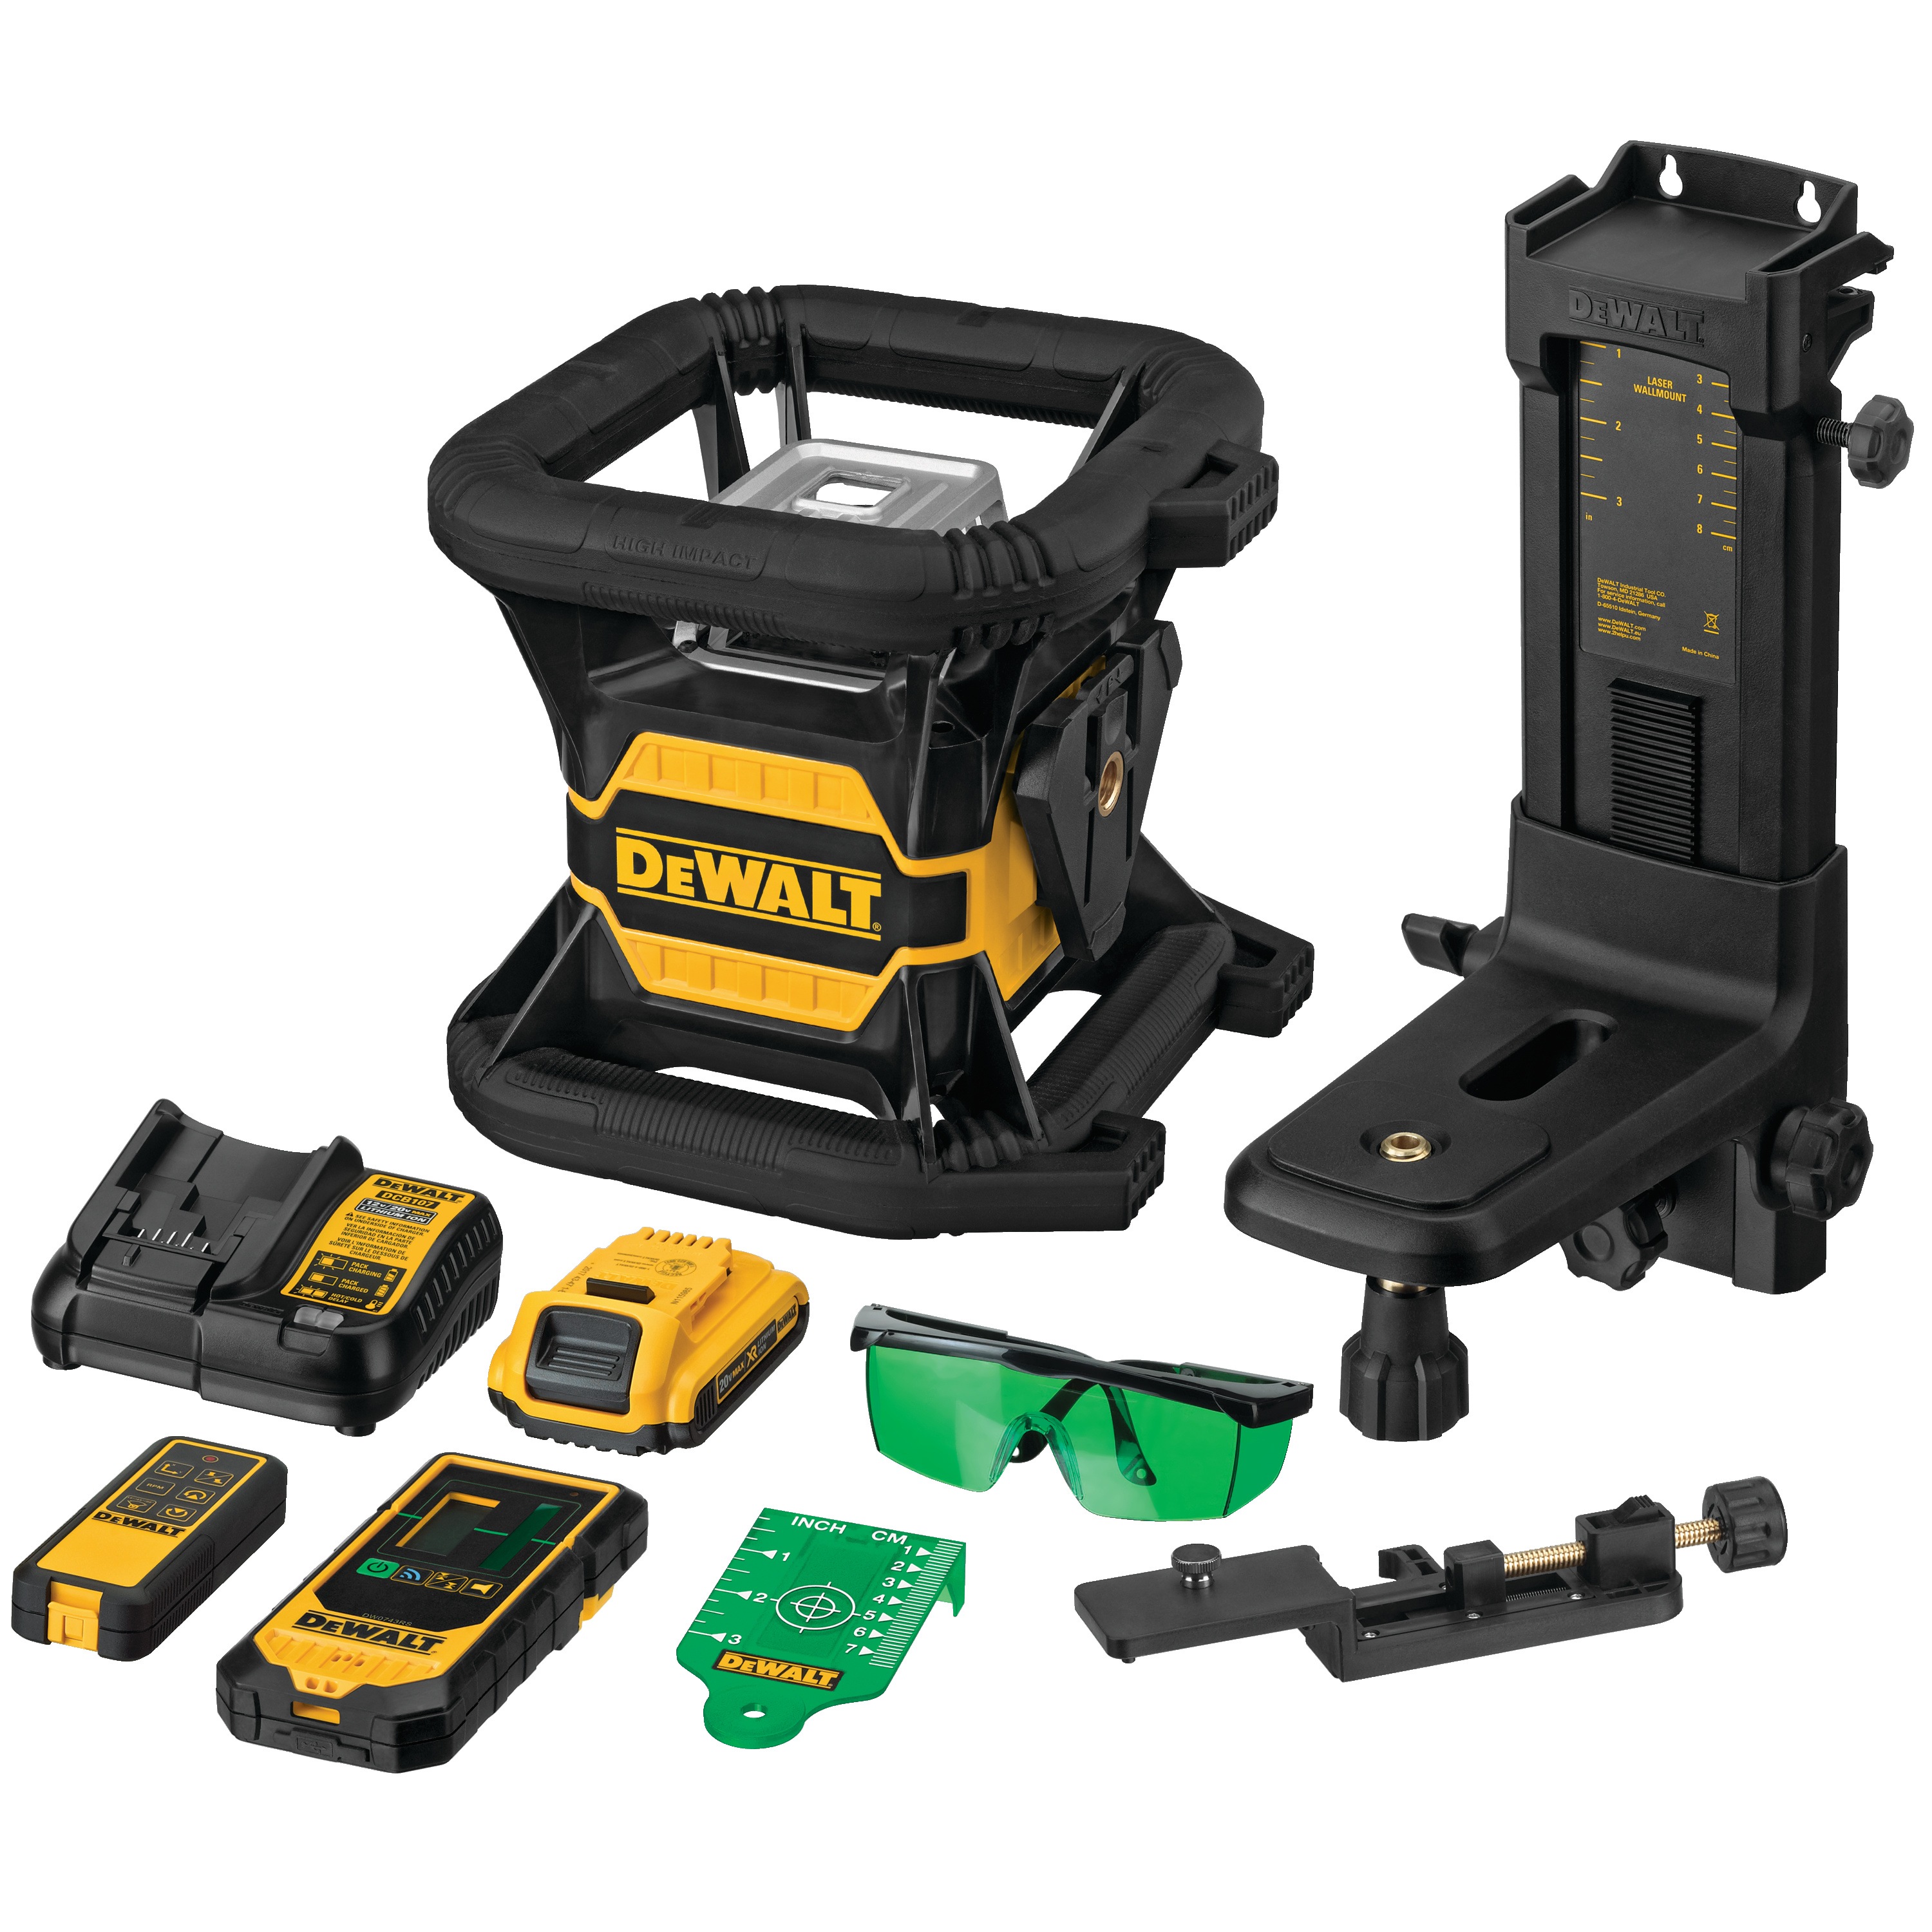 Tool connect green tough rotary laser with full kit.